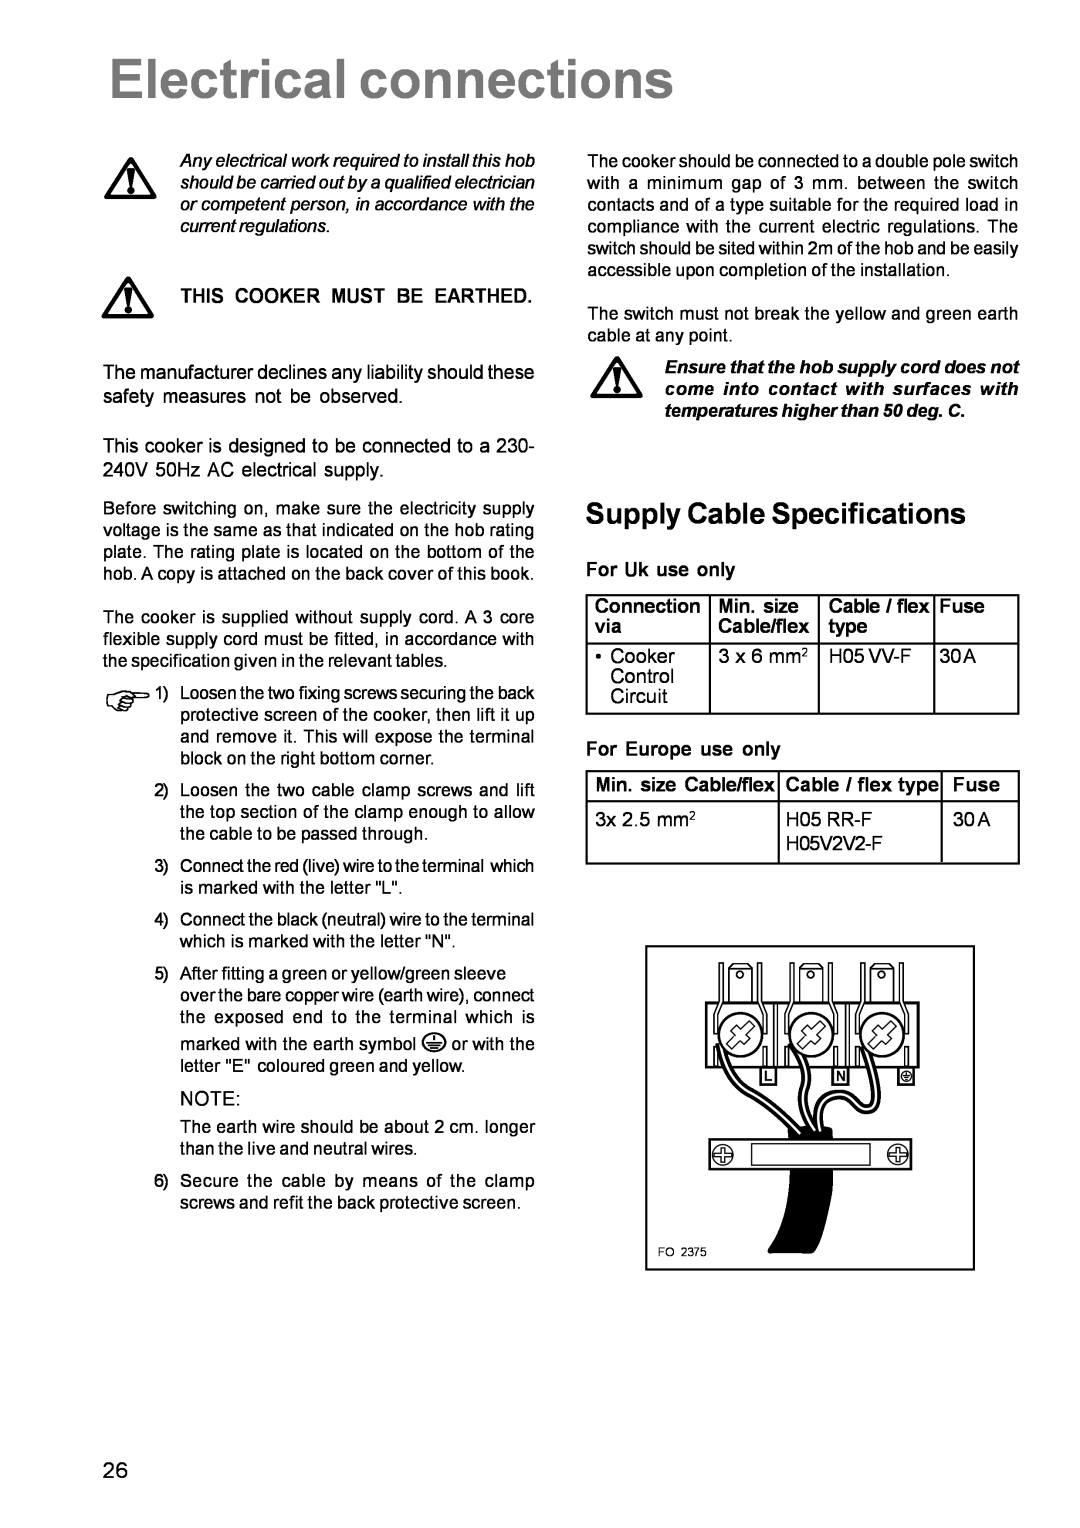 Zanussi ZCE 700 manual Electrical connections, Supply Cable Specifications 